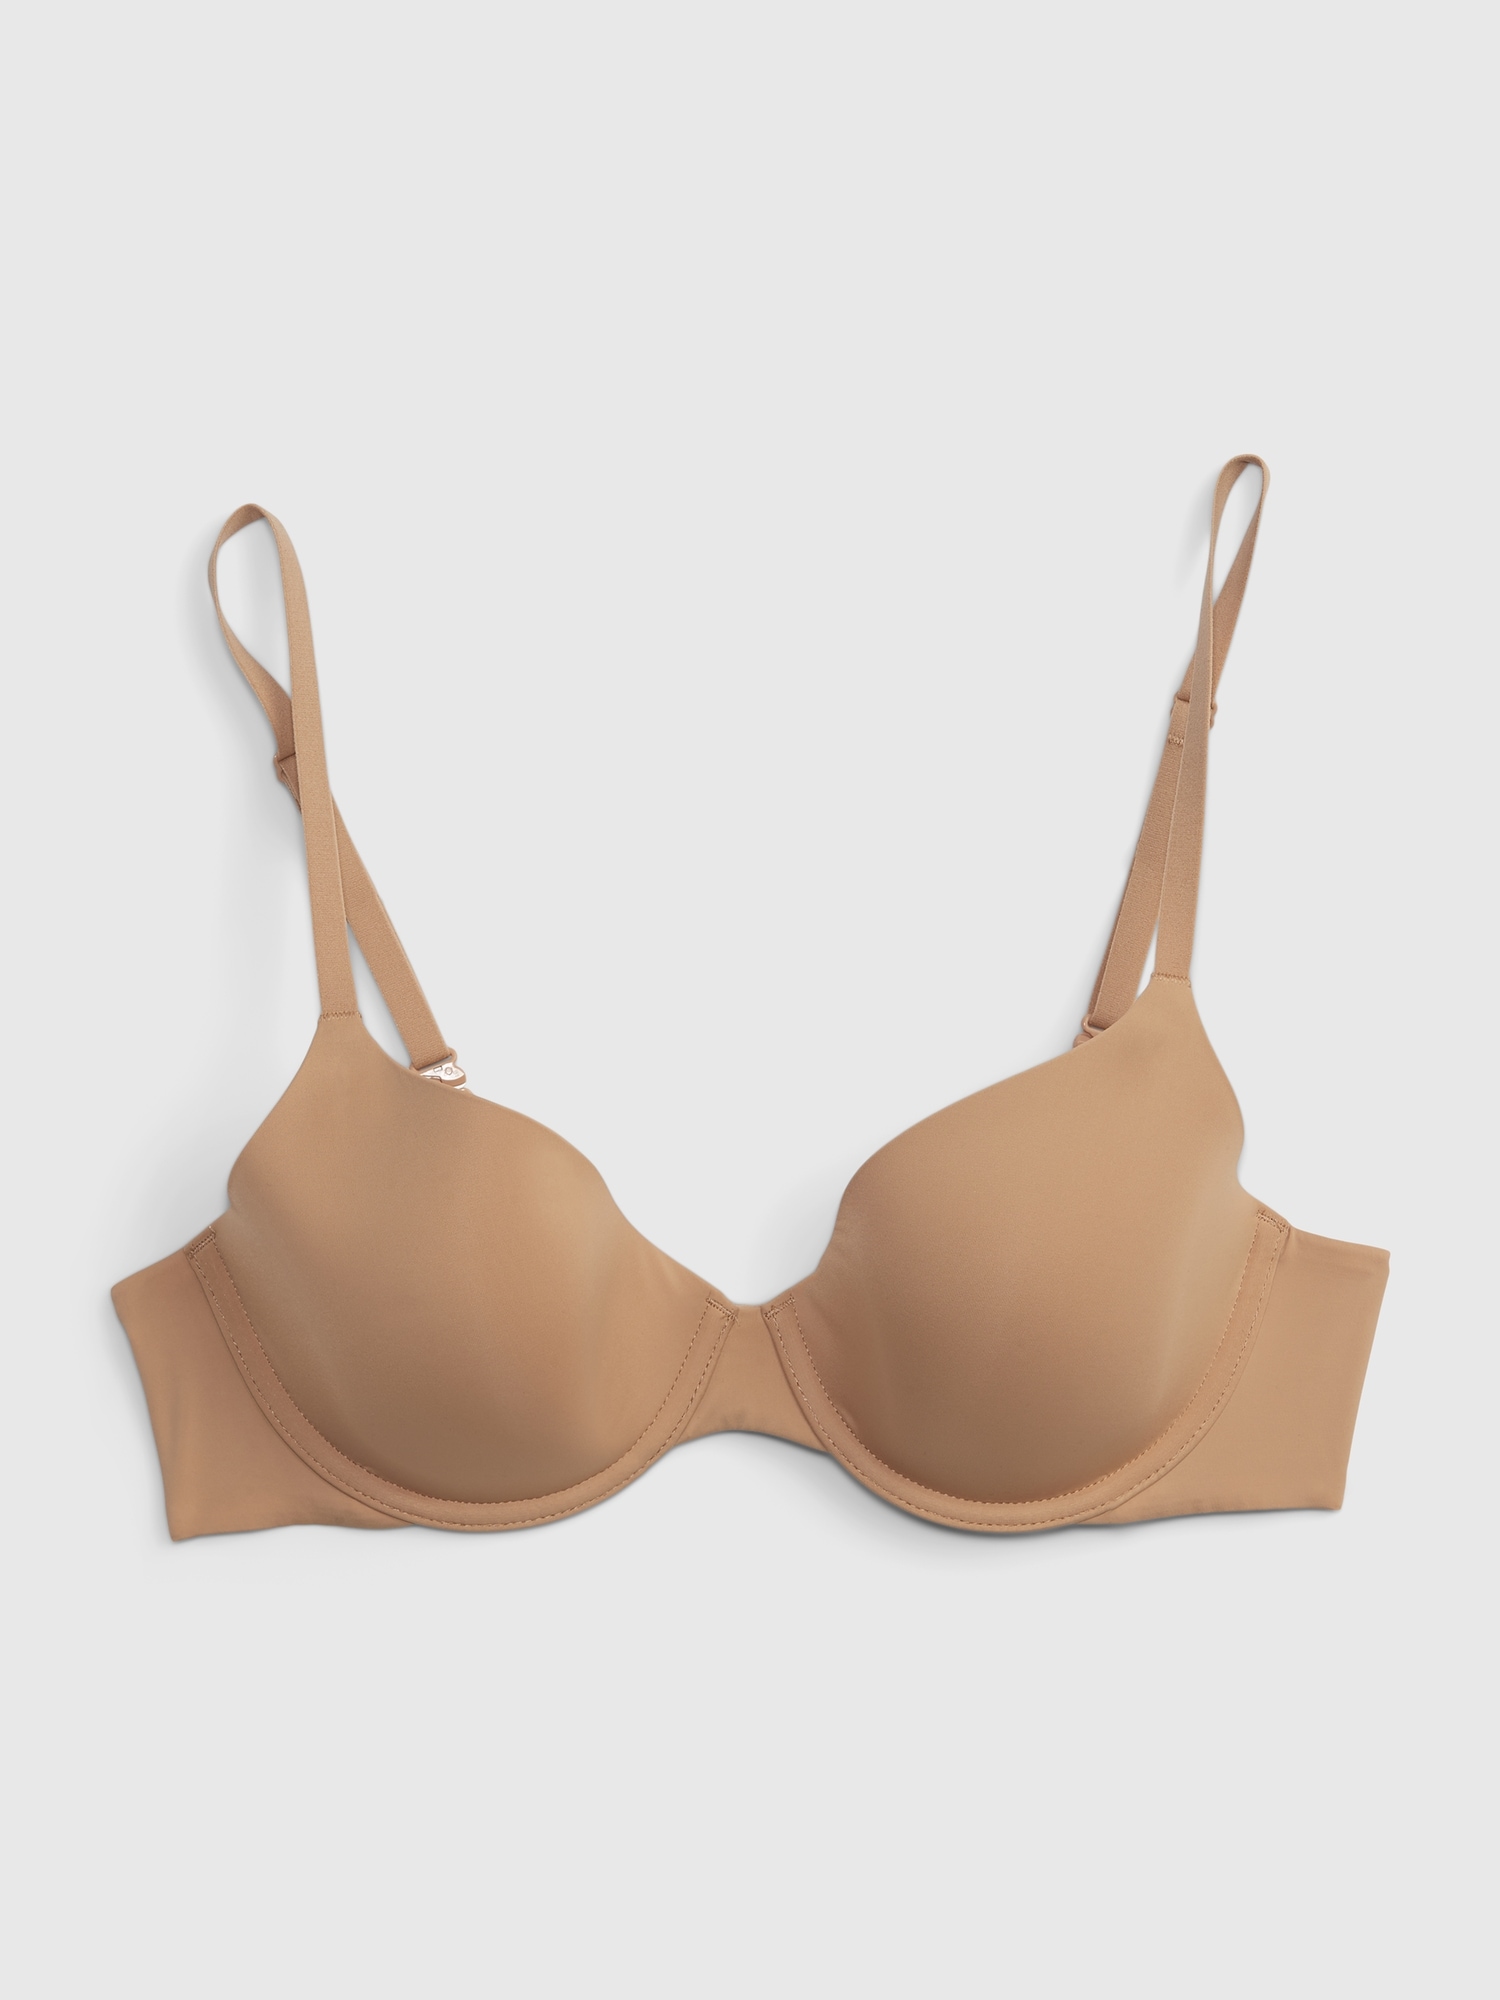 Non-padded Plain T-shirt Bra For Ladies, Ideal For Great Support